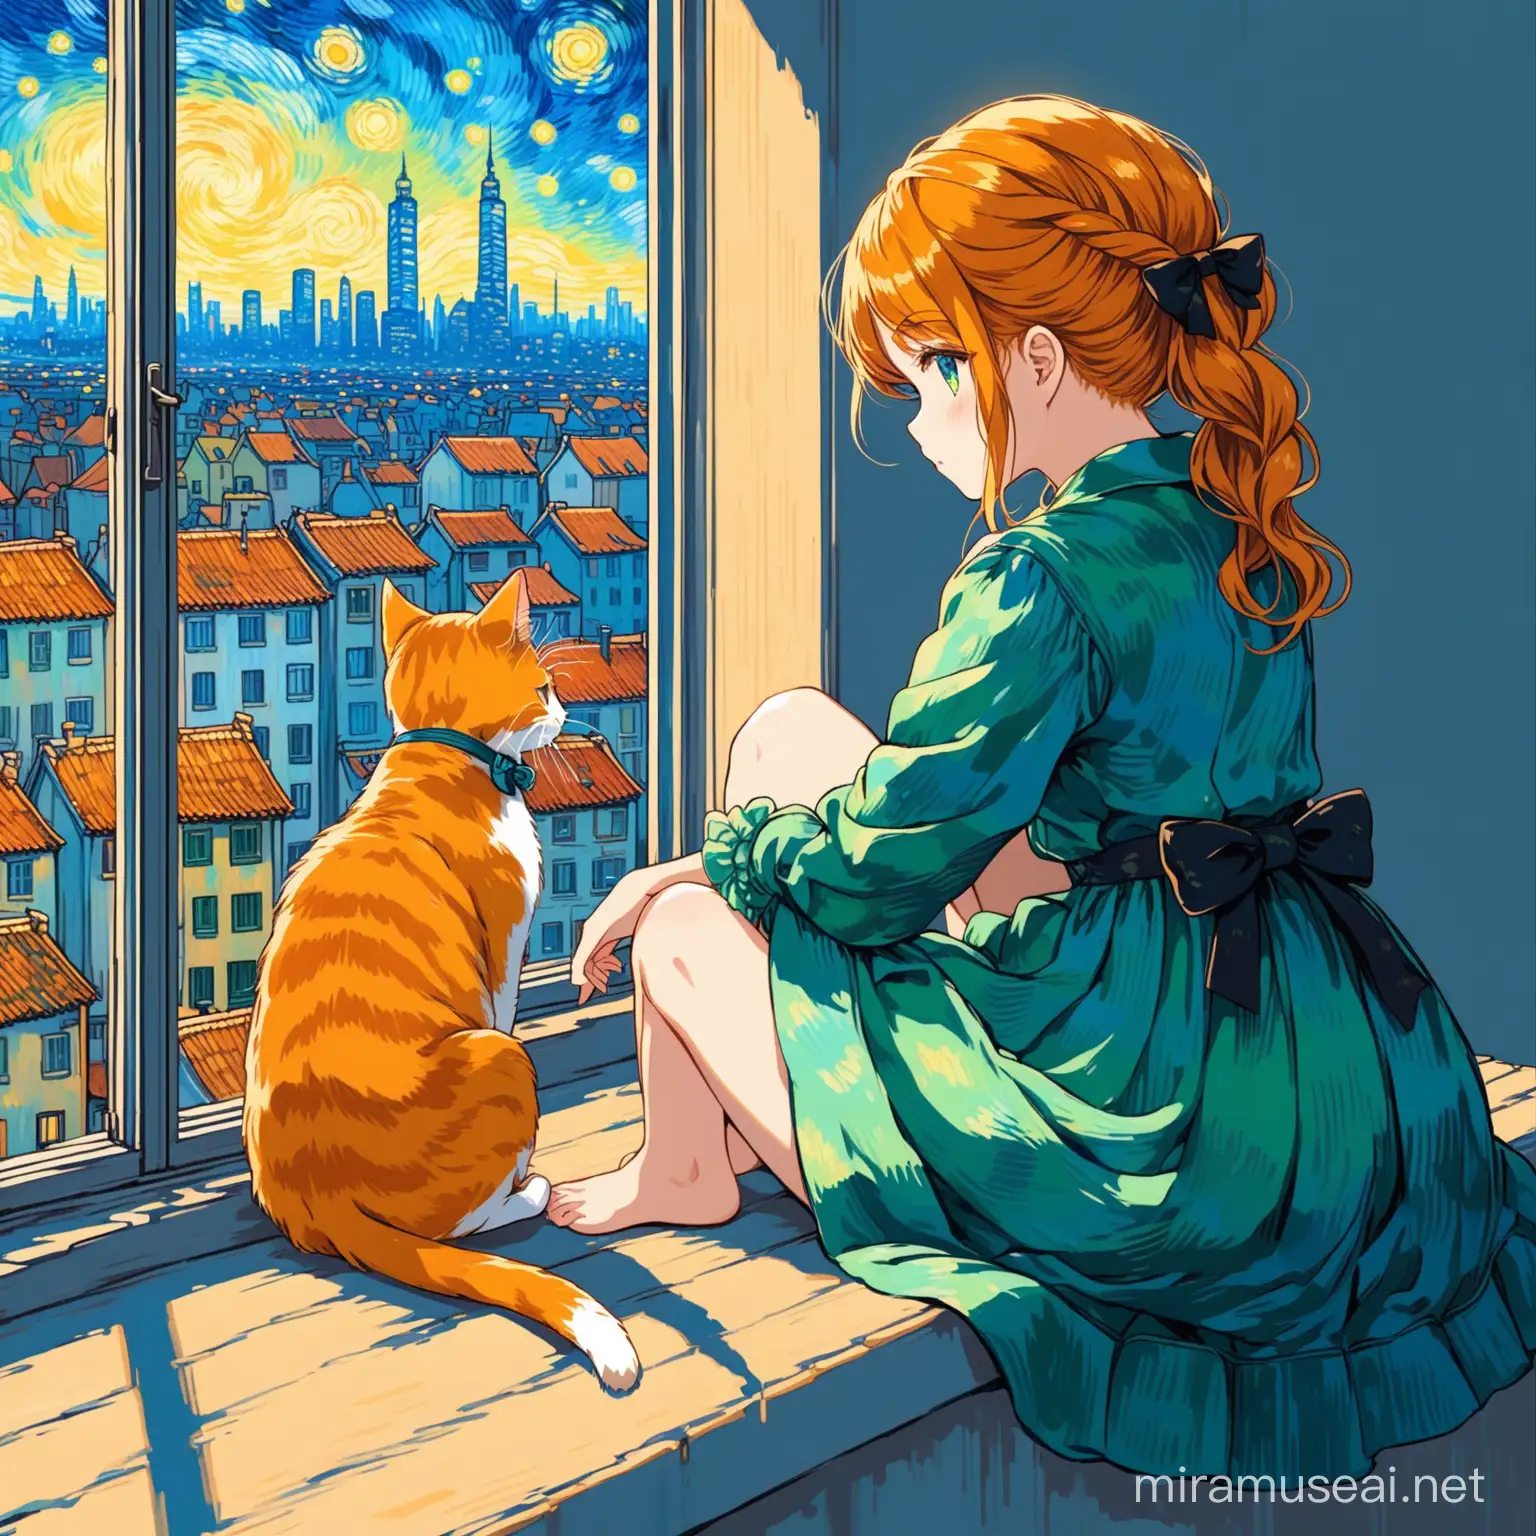 Cute anime girl wearing kawaii outfits with cat perched on window sill, gazing at the urban skyline. Painting. Van Gogh style. HD. Best quality 